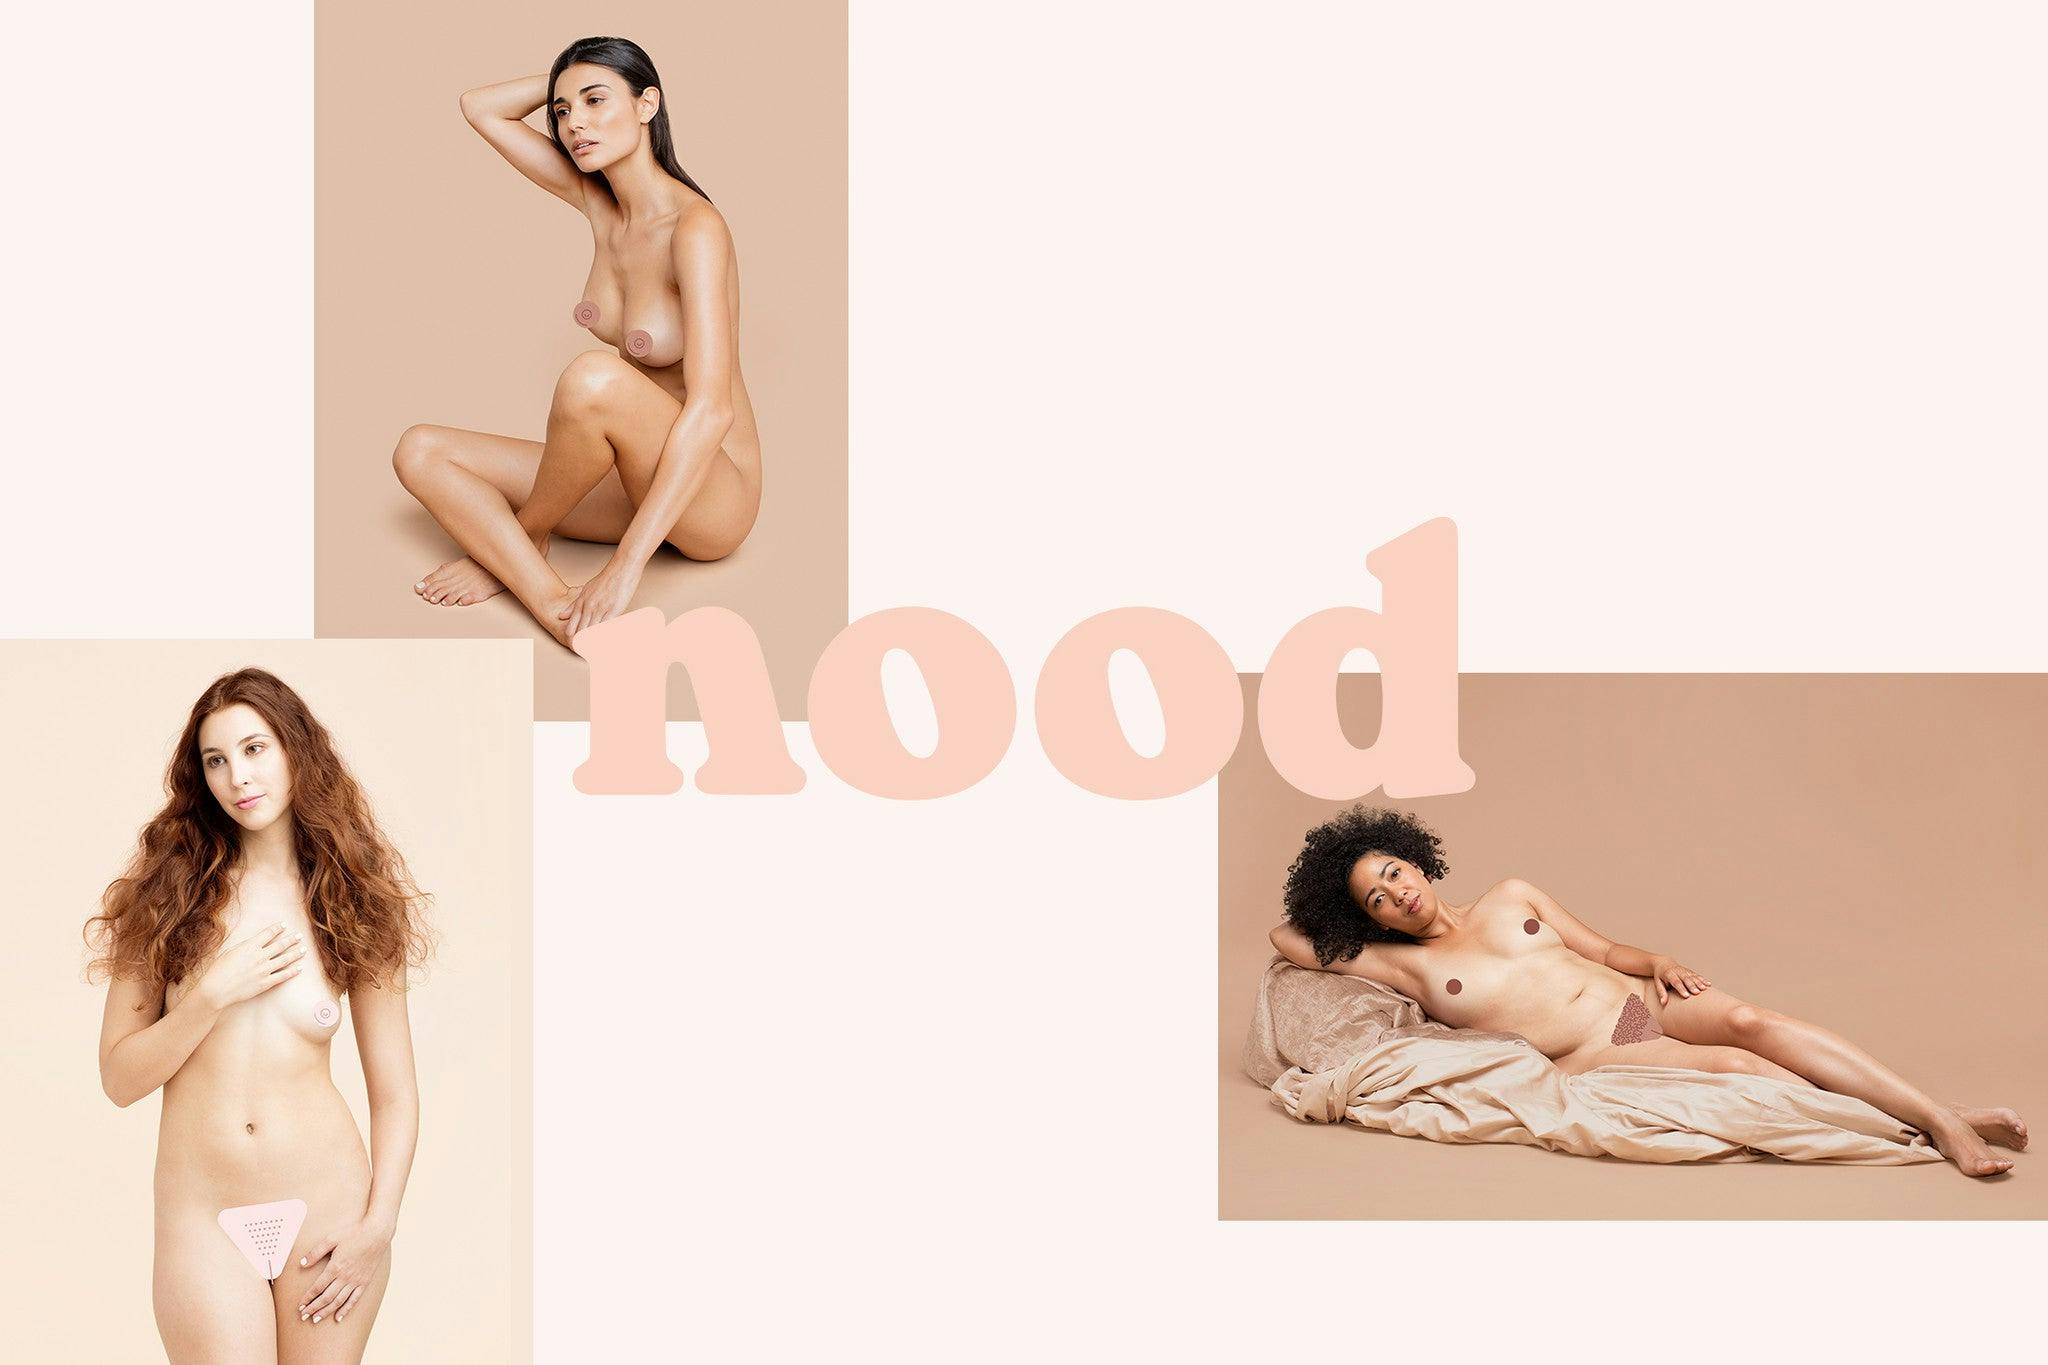 Nood: An App That Covers Your Ladyparts, Sort Of Photo